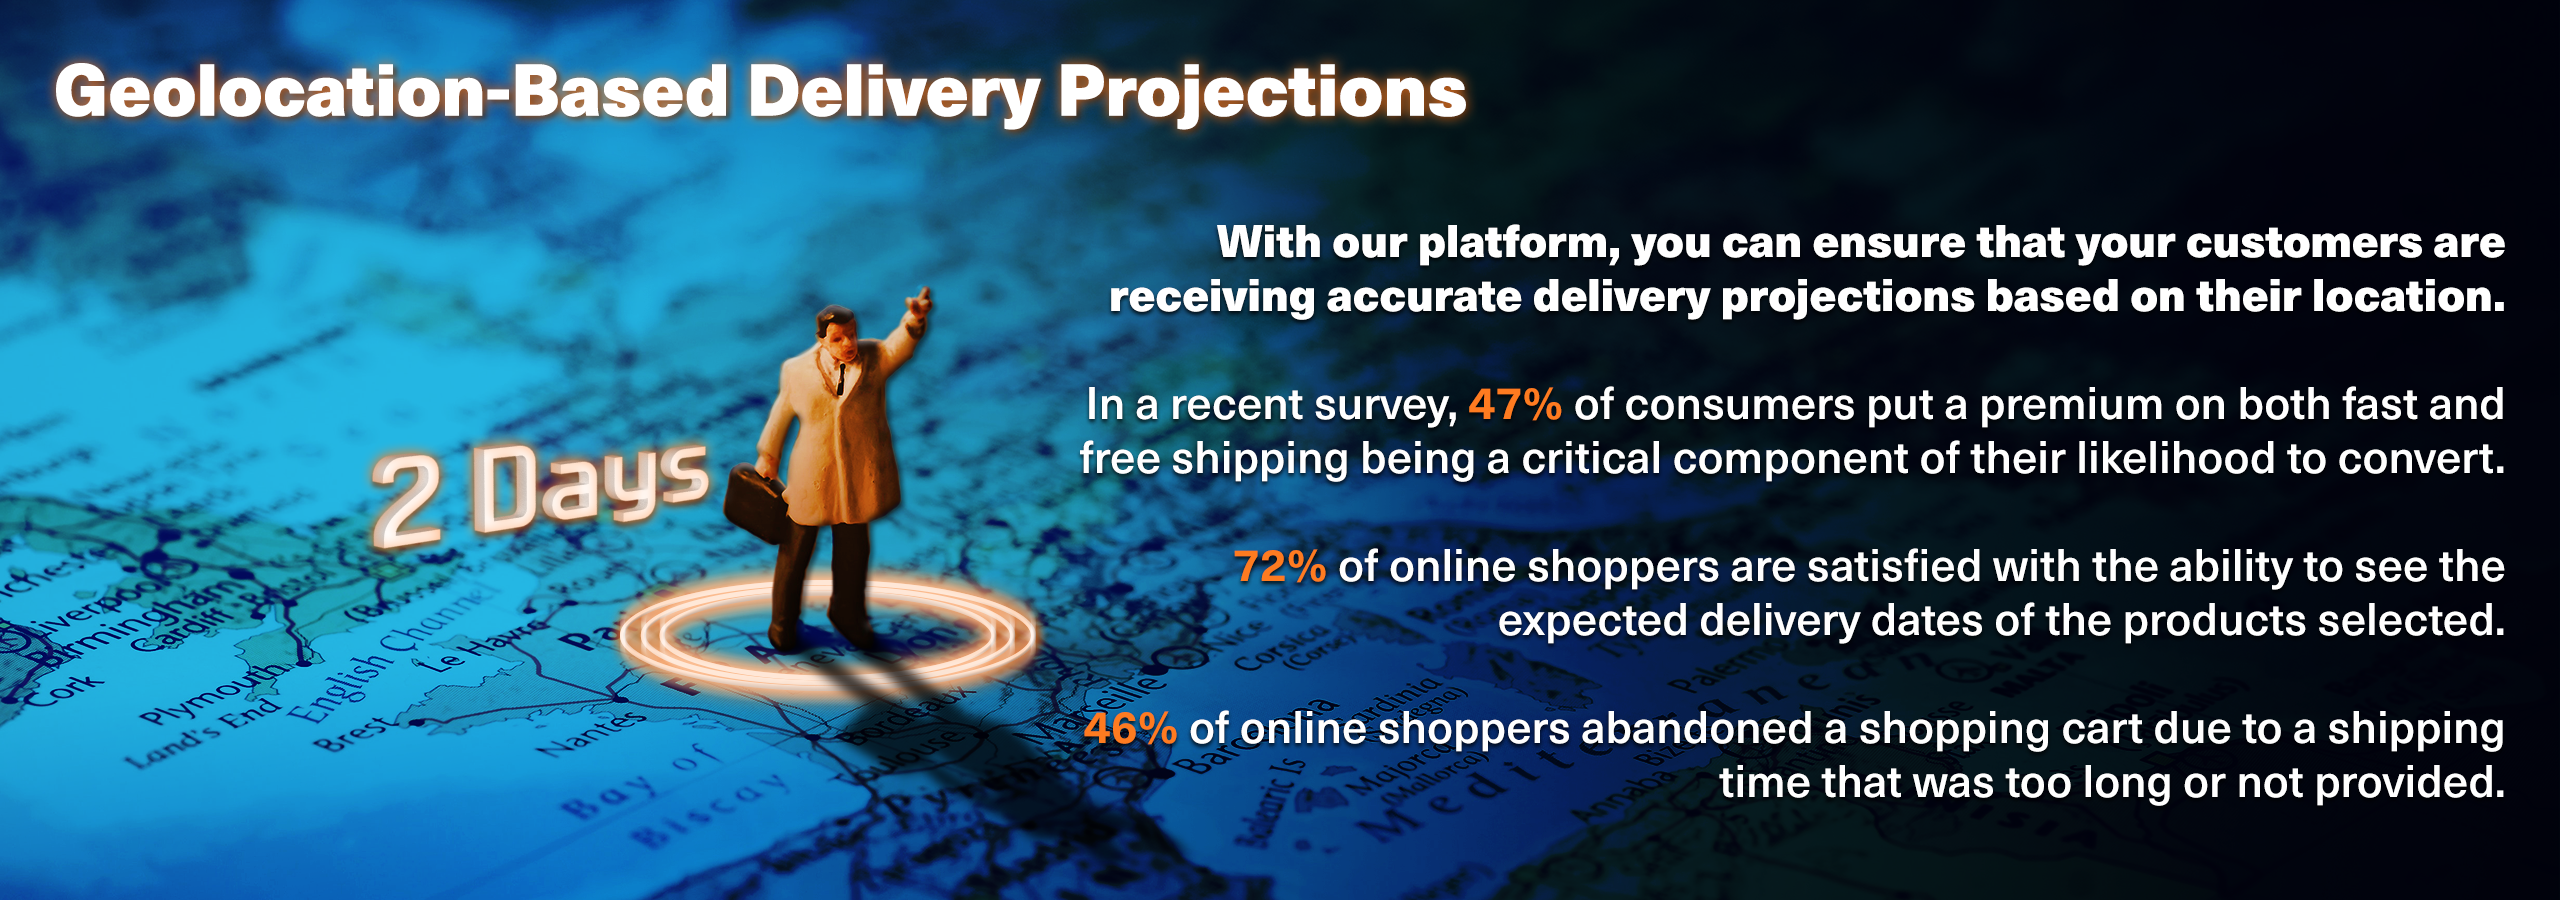 With our platform, you can ensure that your customers are receiving accurate delivery projections based on their location.